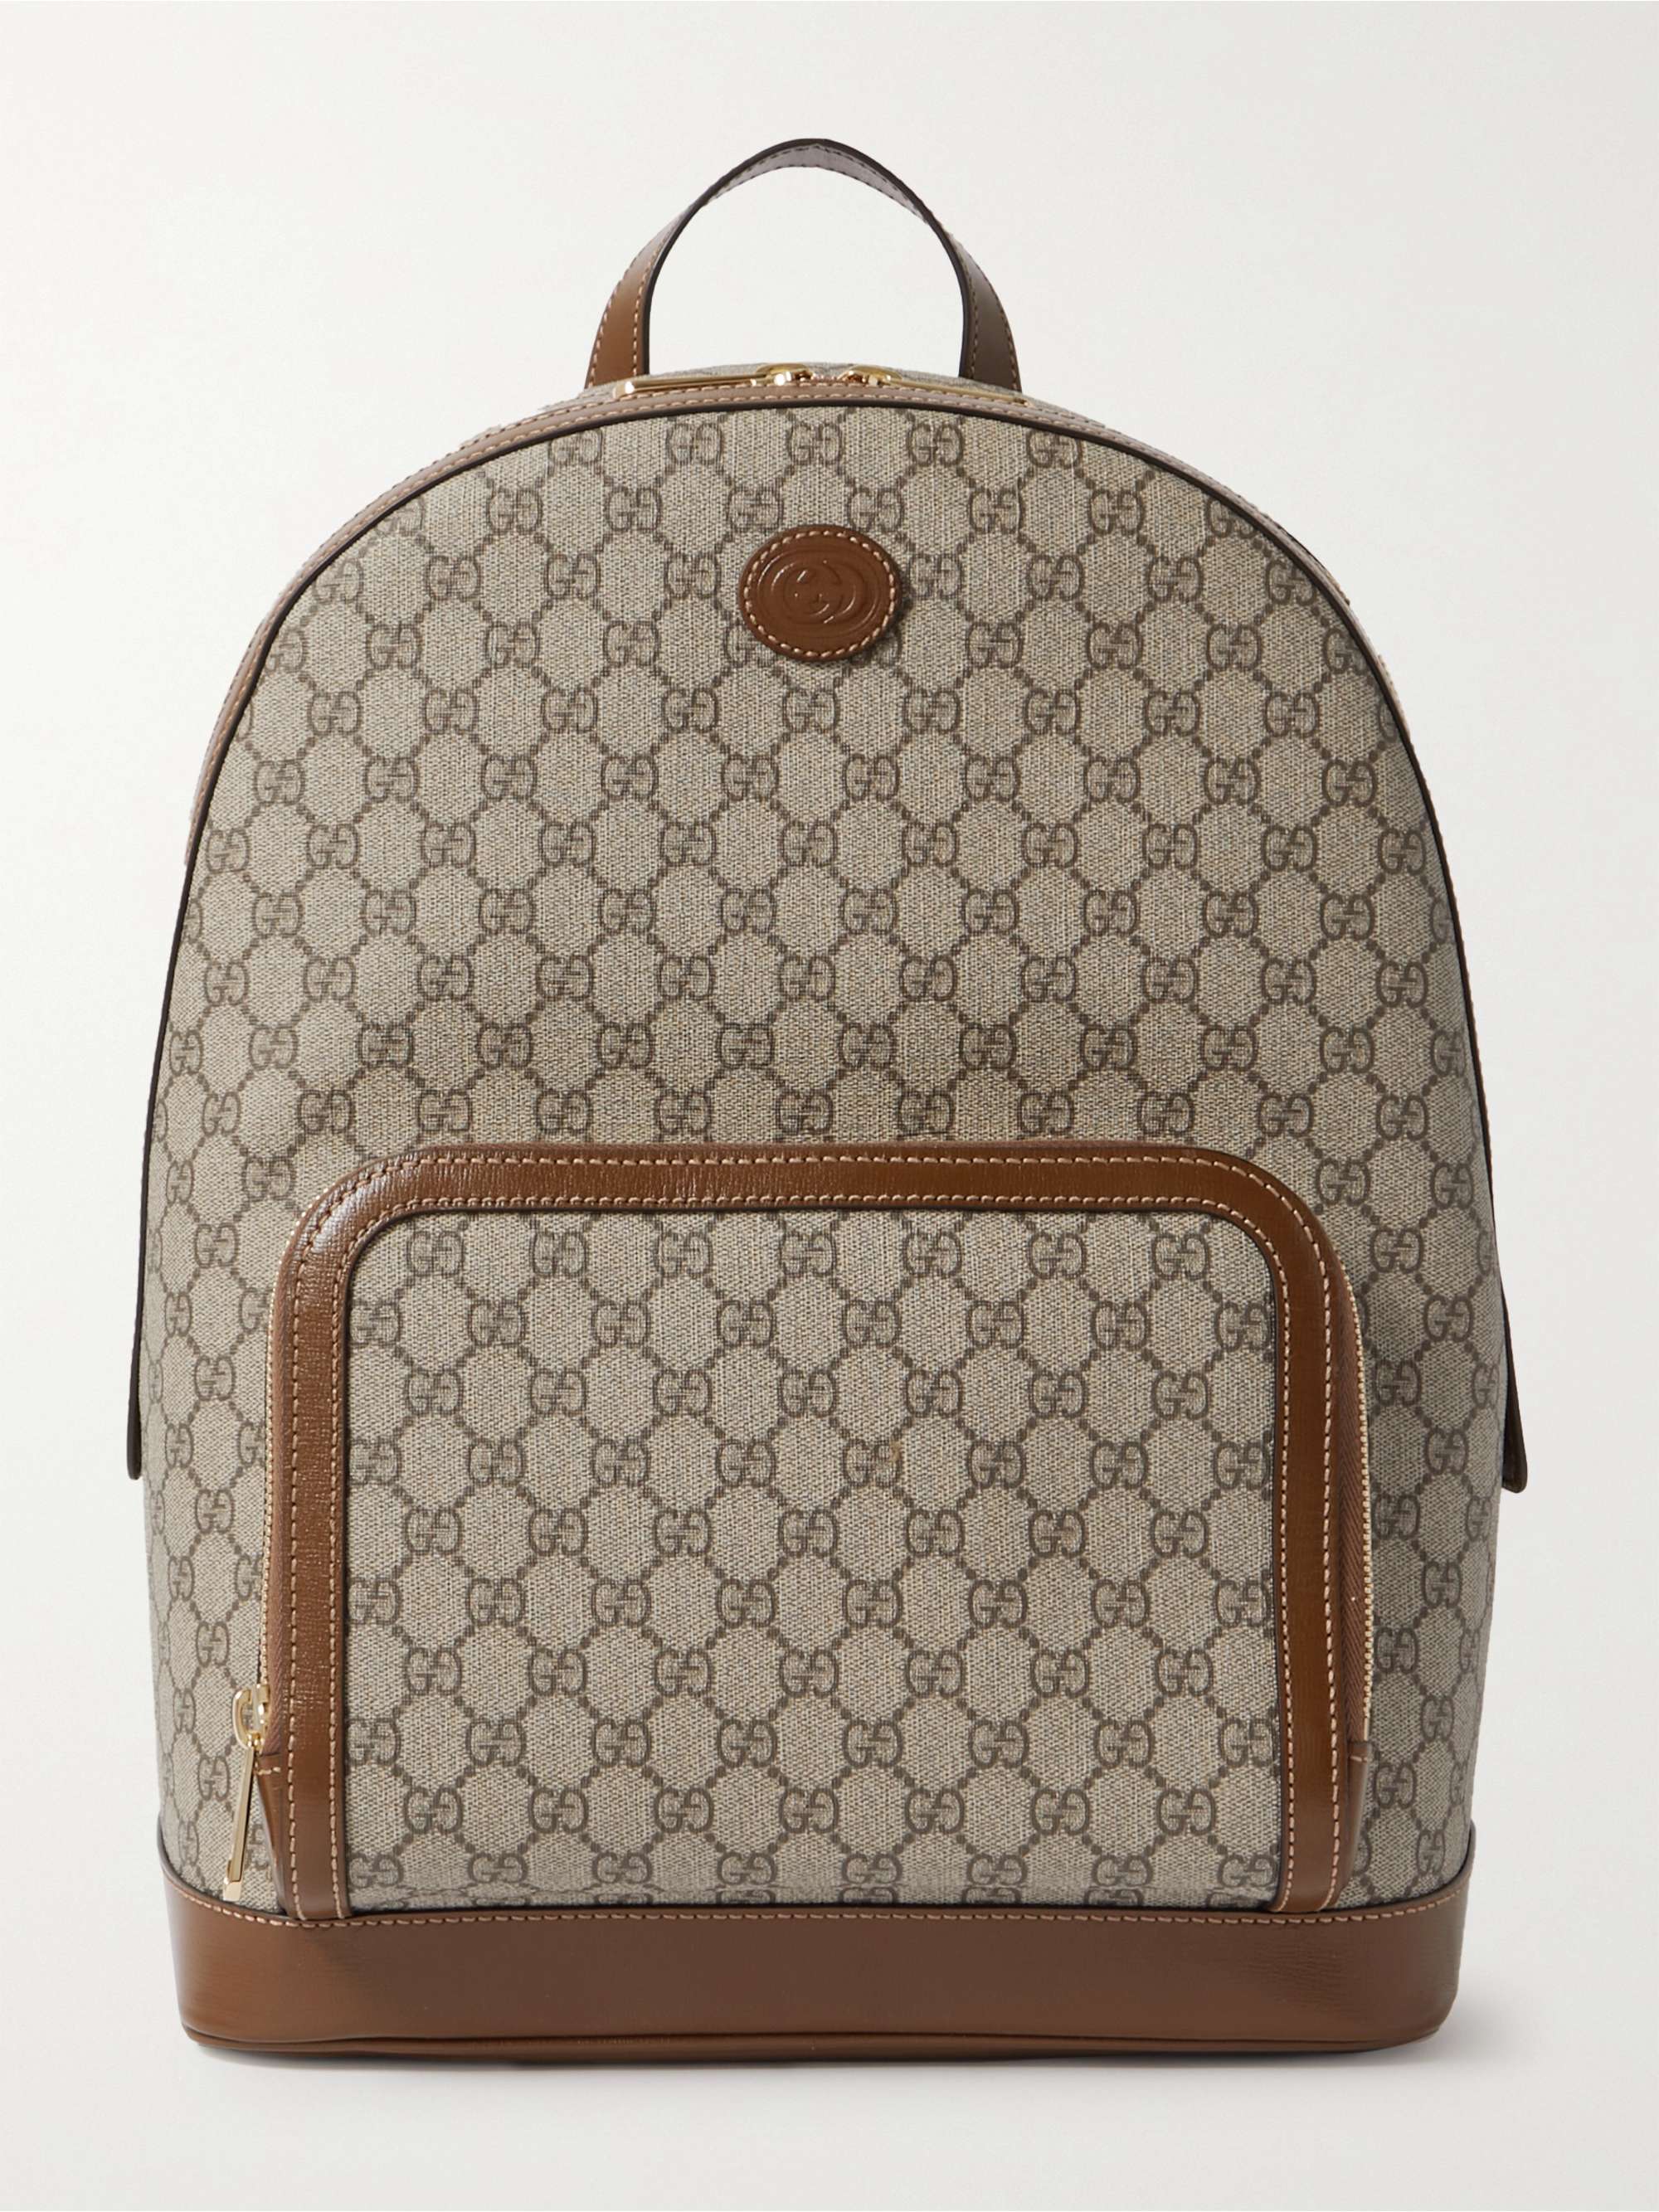 GUCCI Retro Leather-Trimmed Monogrammed Coated-Canvas Backpack for Men